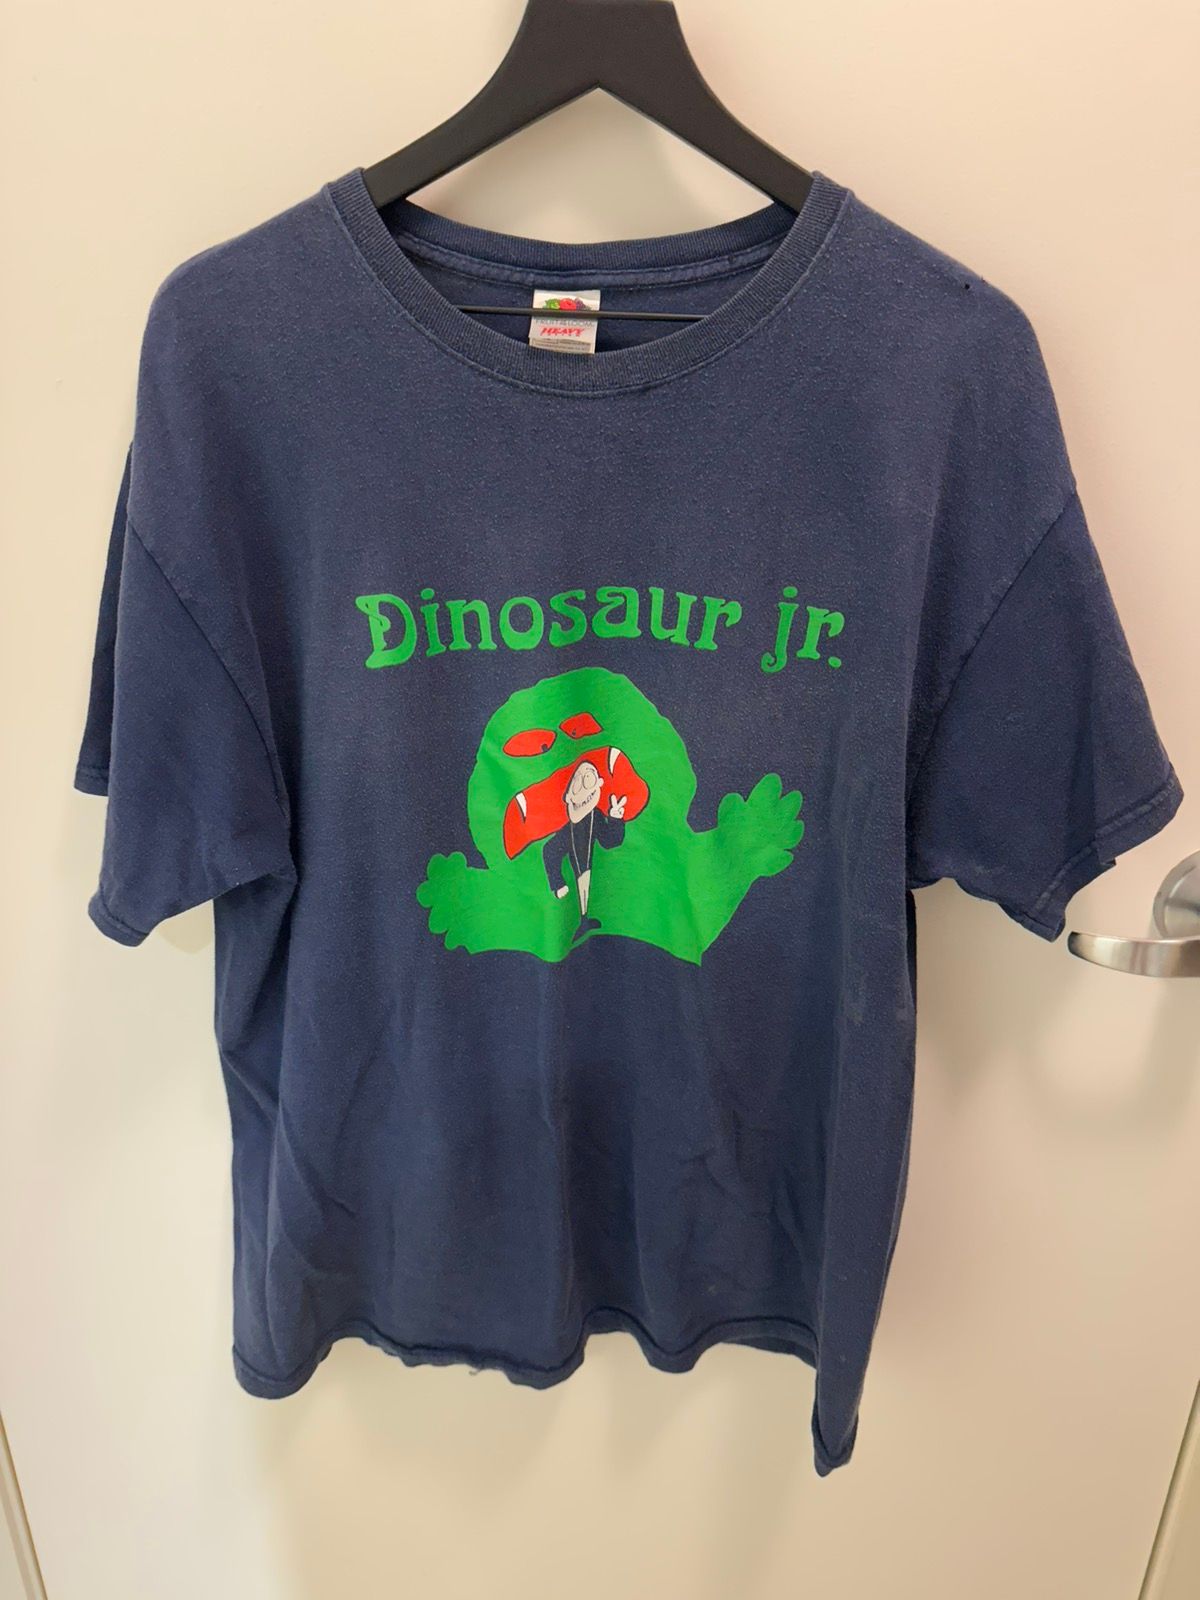 Band Tees x Vintage Dinosaur Jr Shirt in Null, Men's (Size XL) Product Image